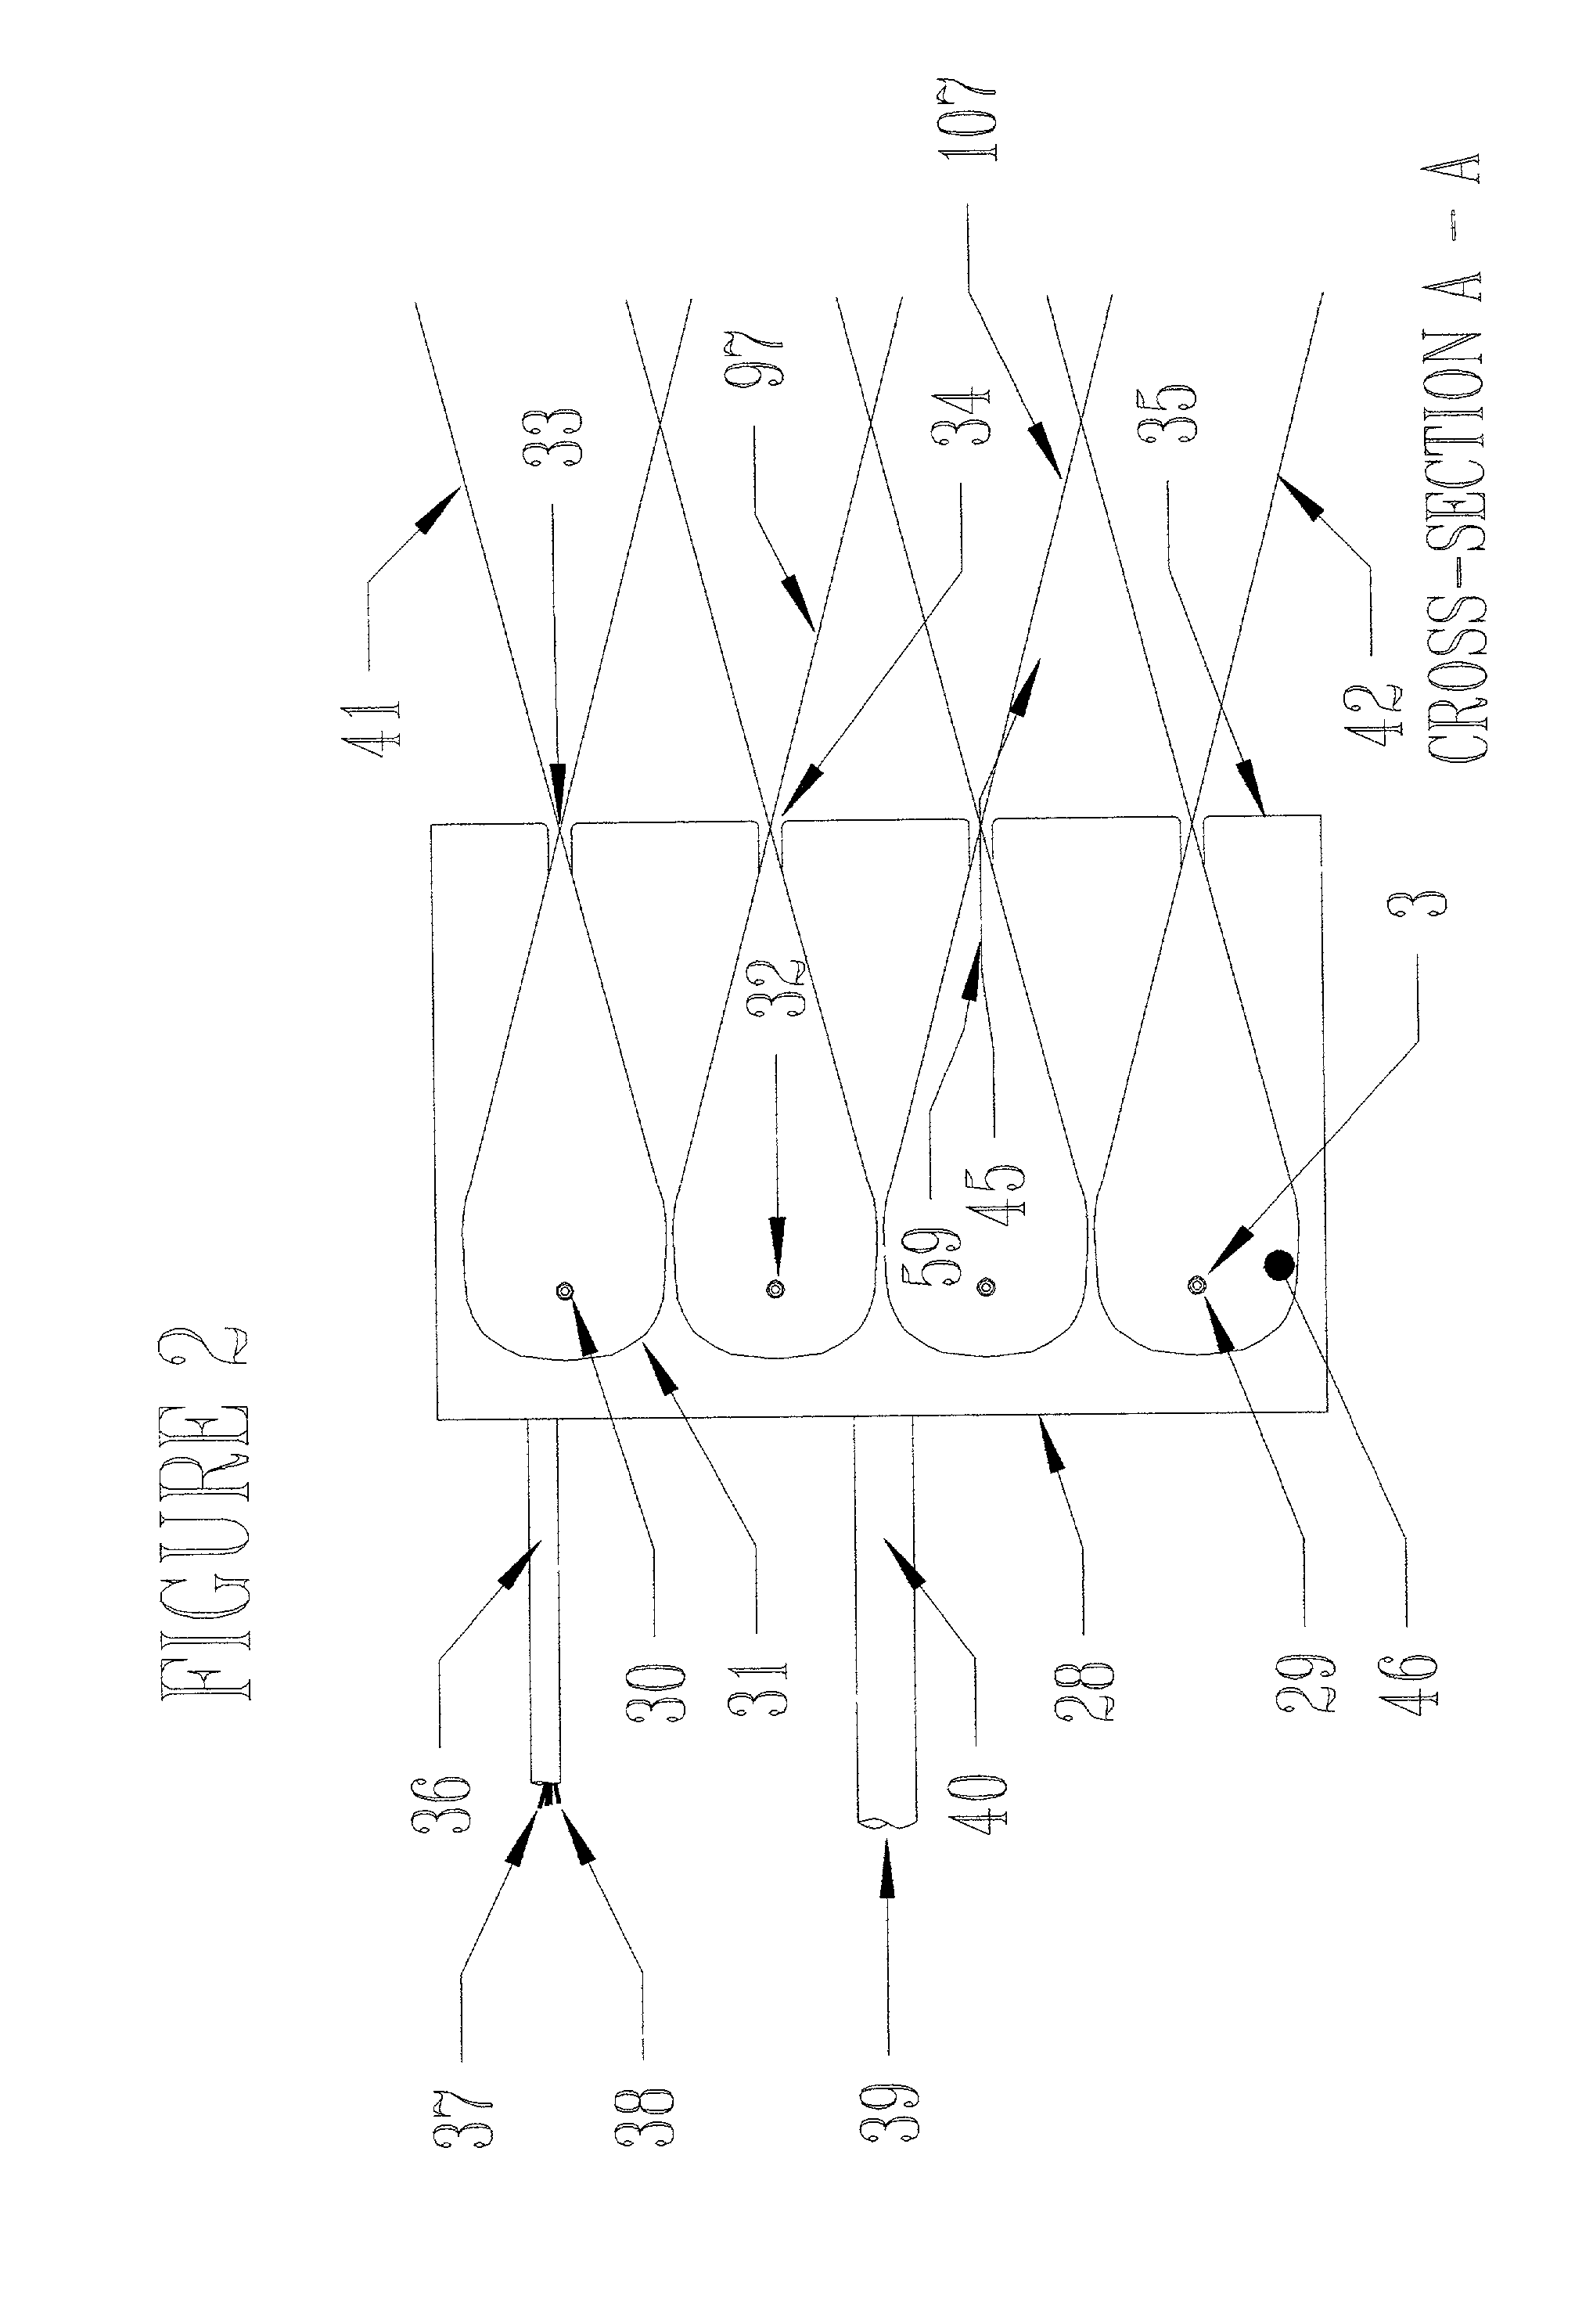 Method and apparatus for processing coatings, radiation curable coatings on wood, wood composite and other various substrates